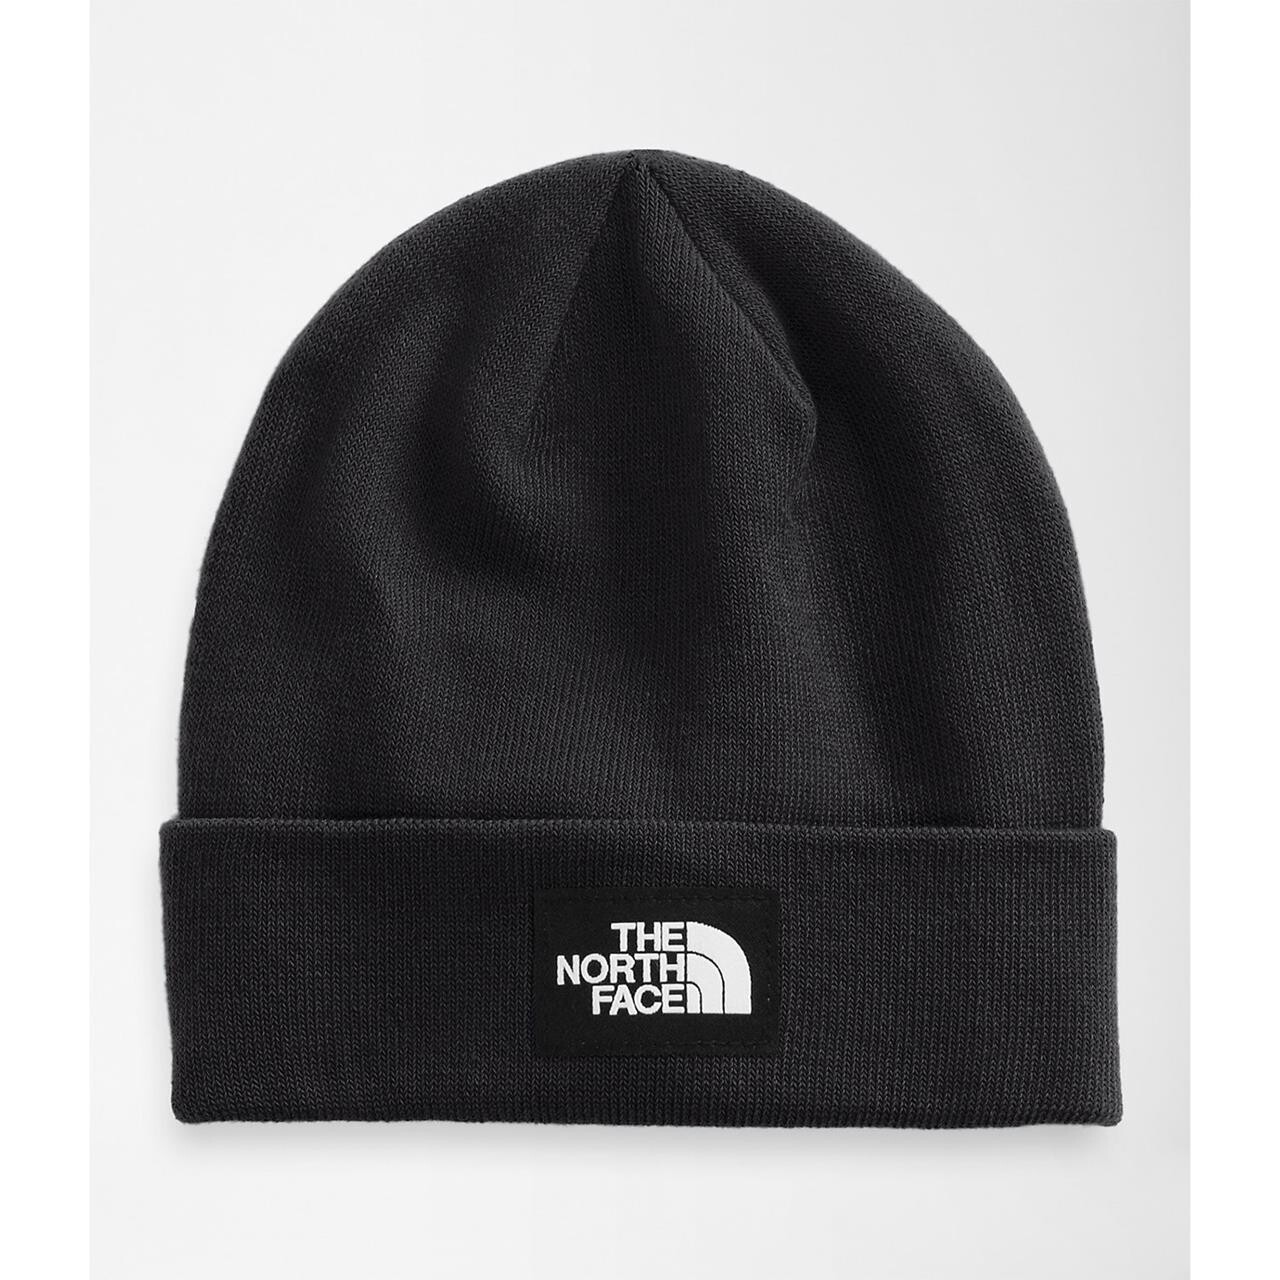 8: The North Face Dock Worker Recycled Beanie (Sort (TNF BLACK) One size)